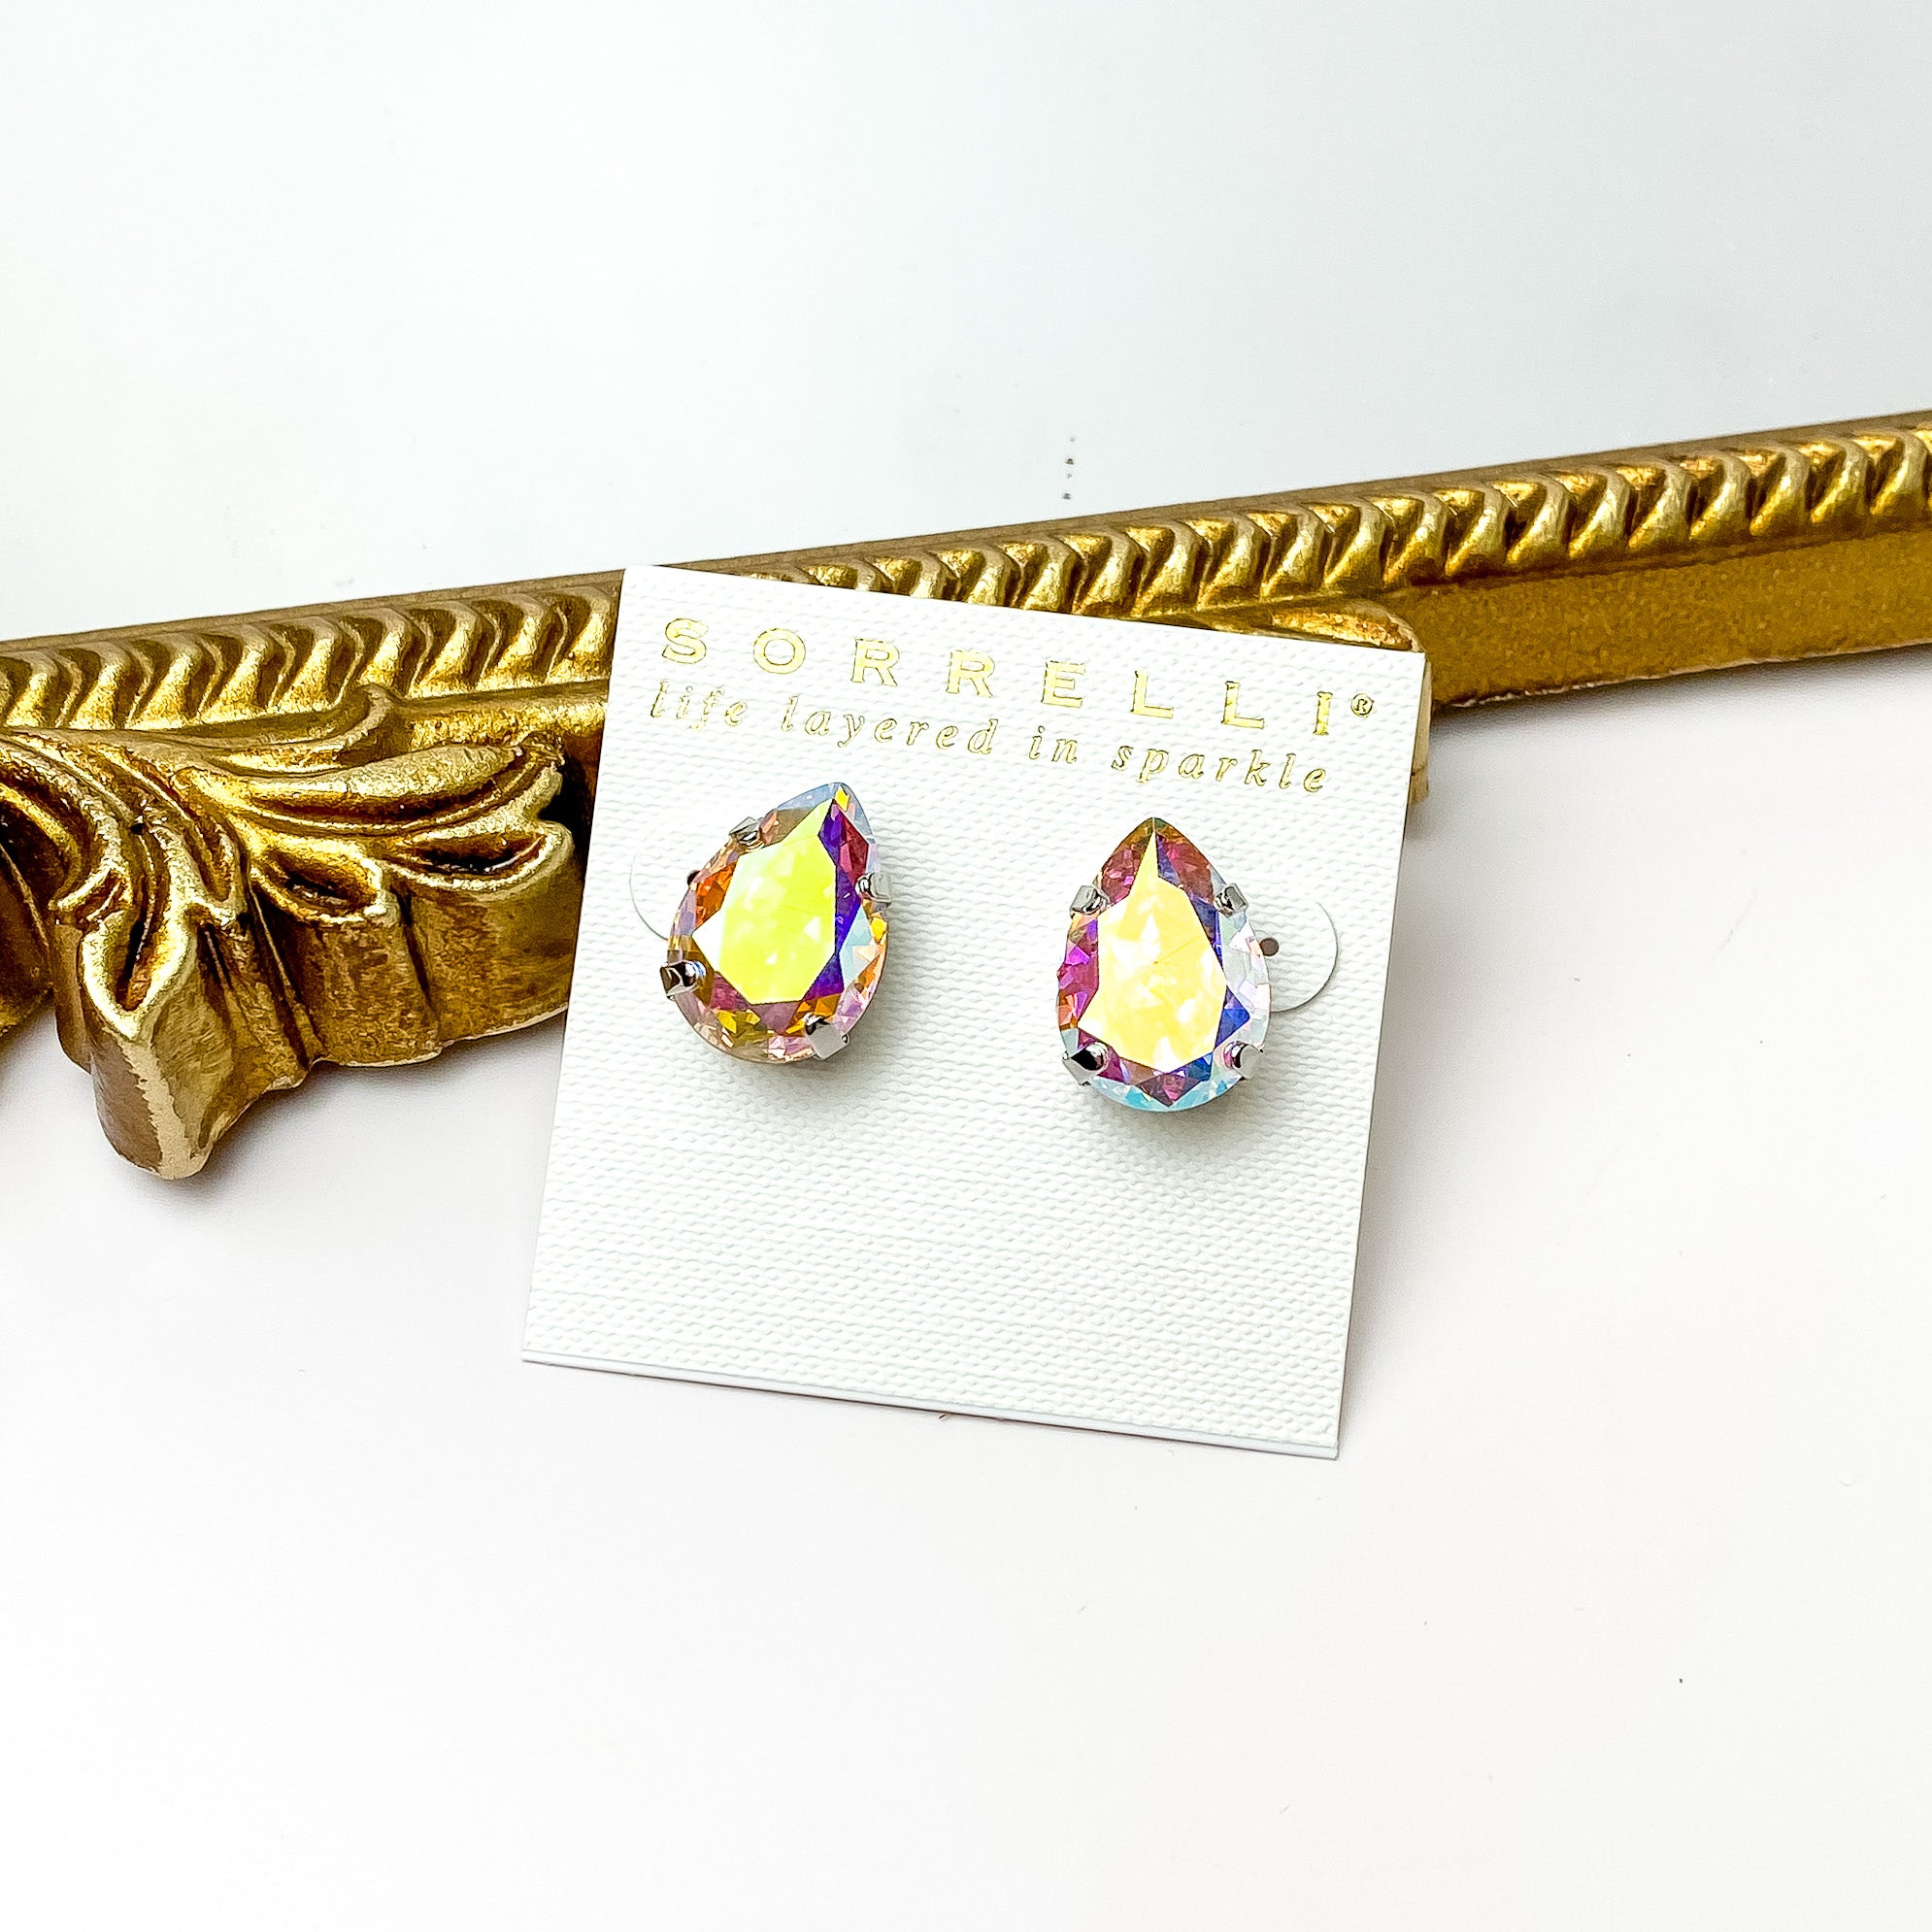 Single AB crystal stud earrings with a silver backing. Pictured on a white background with a gold figure through the middle